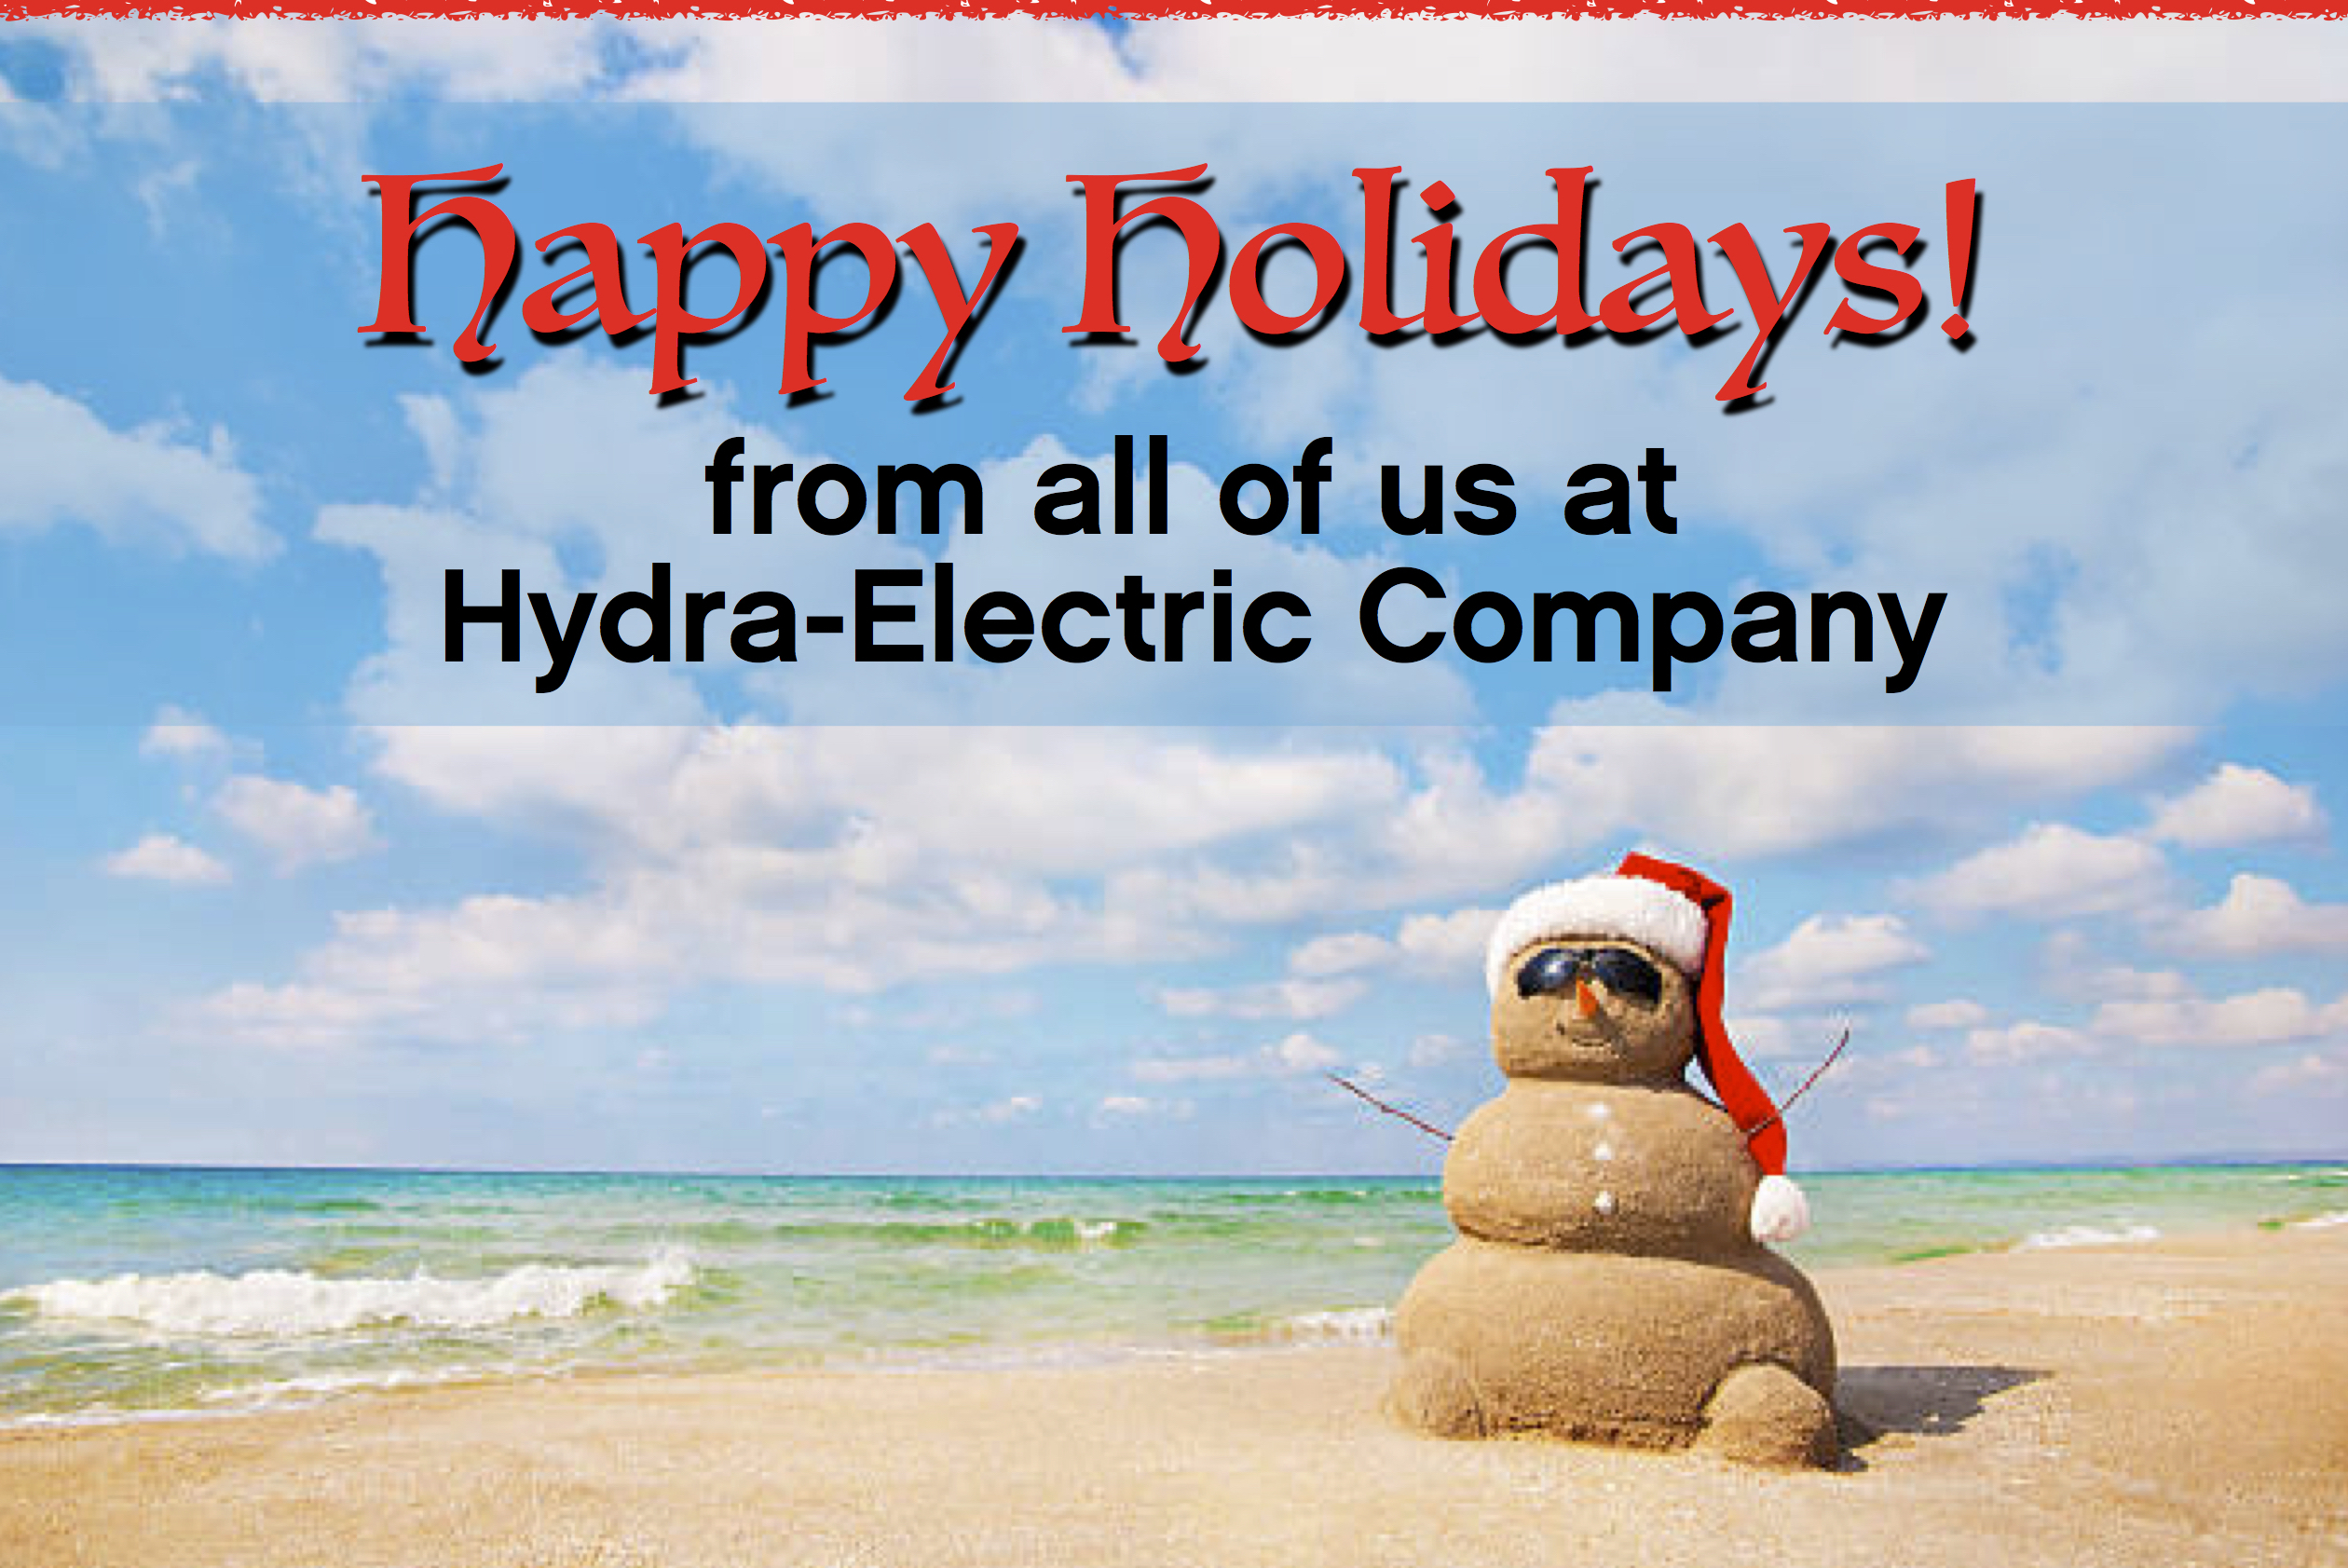 HAPPY HOLIDAYS!  See our holiday schedule.